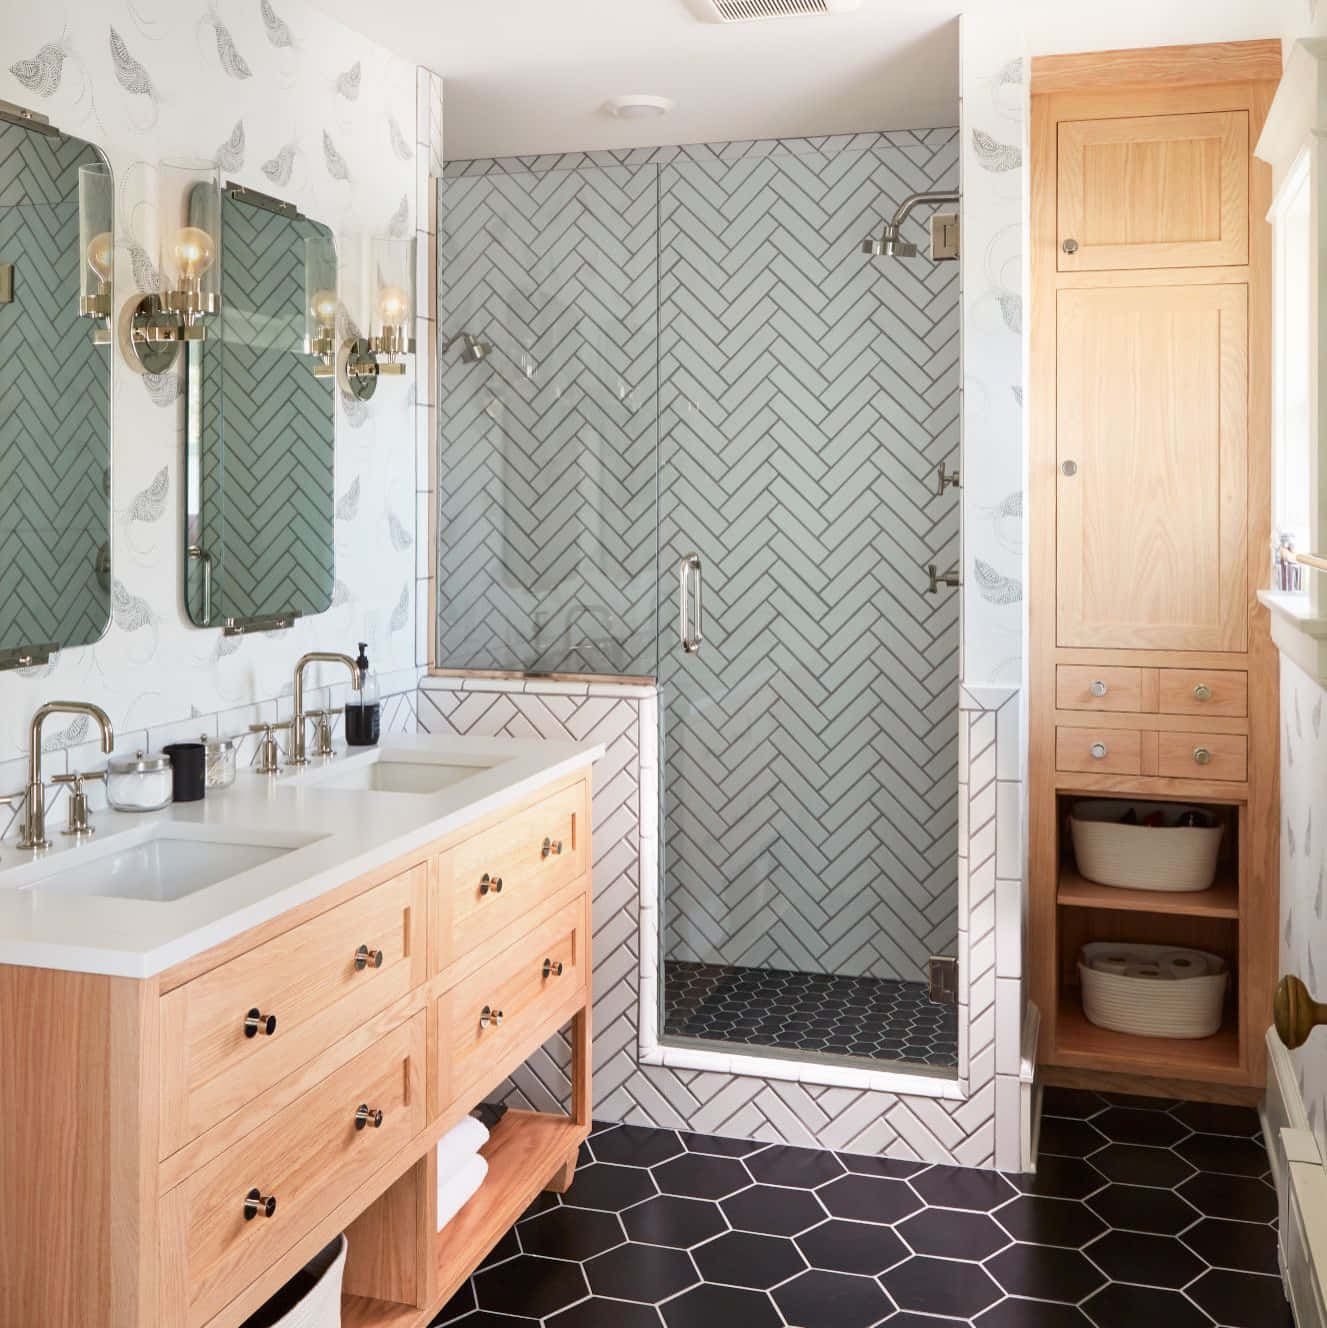 Get ready to relax in this cozy and tranquil bathroom